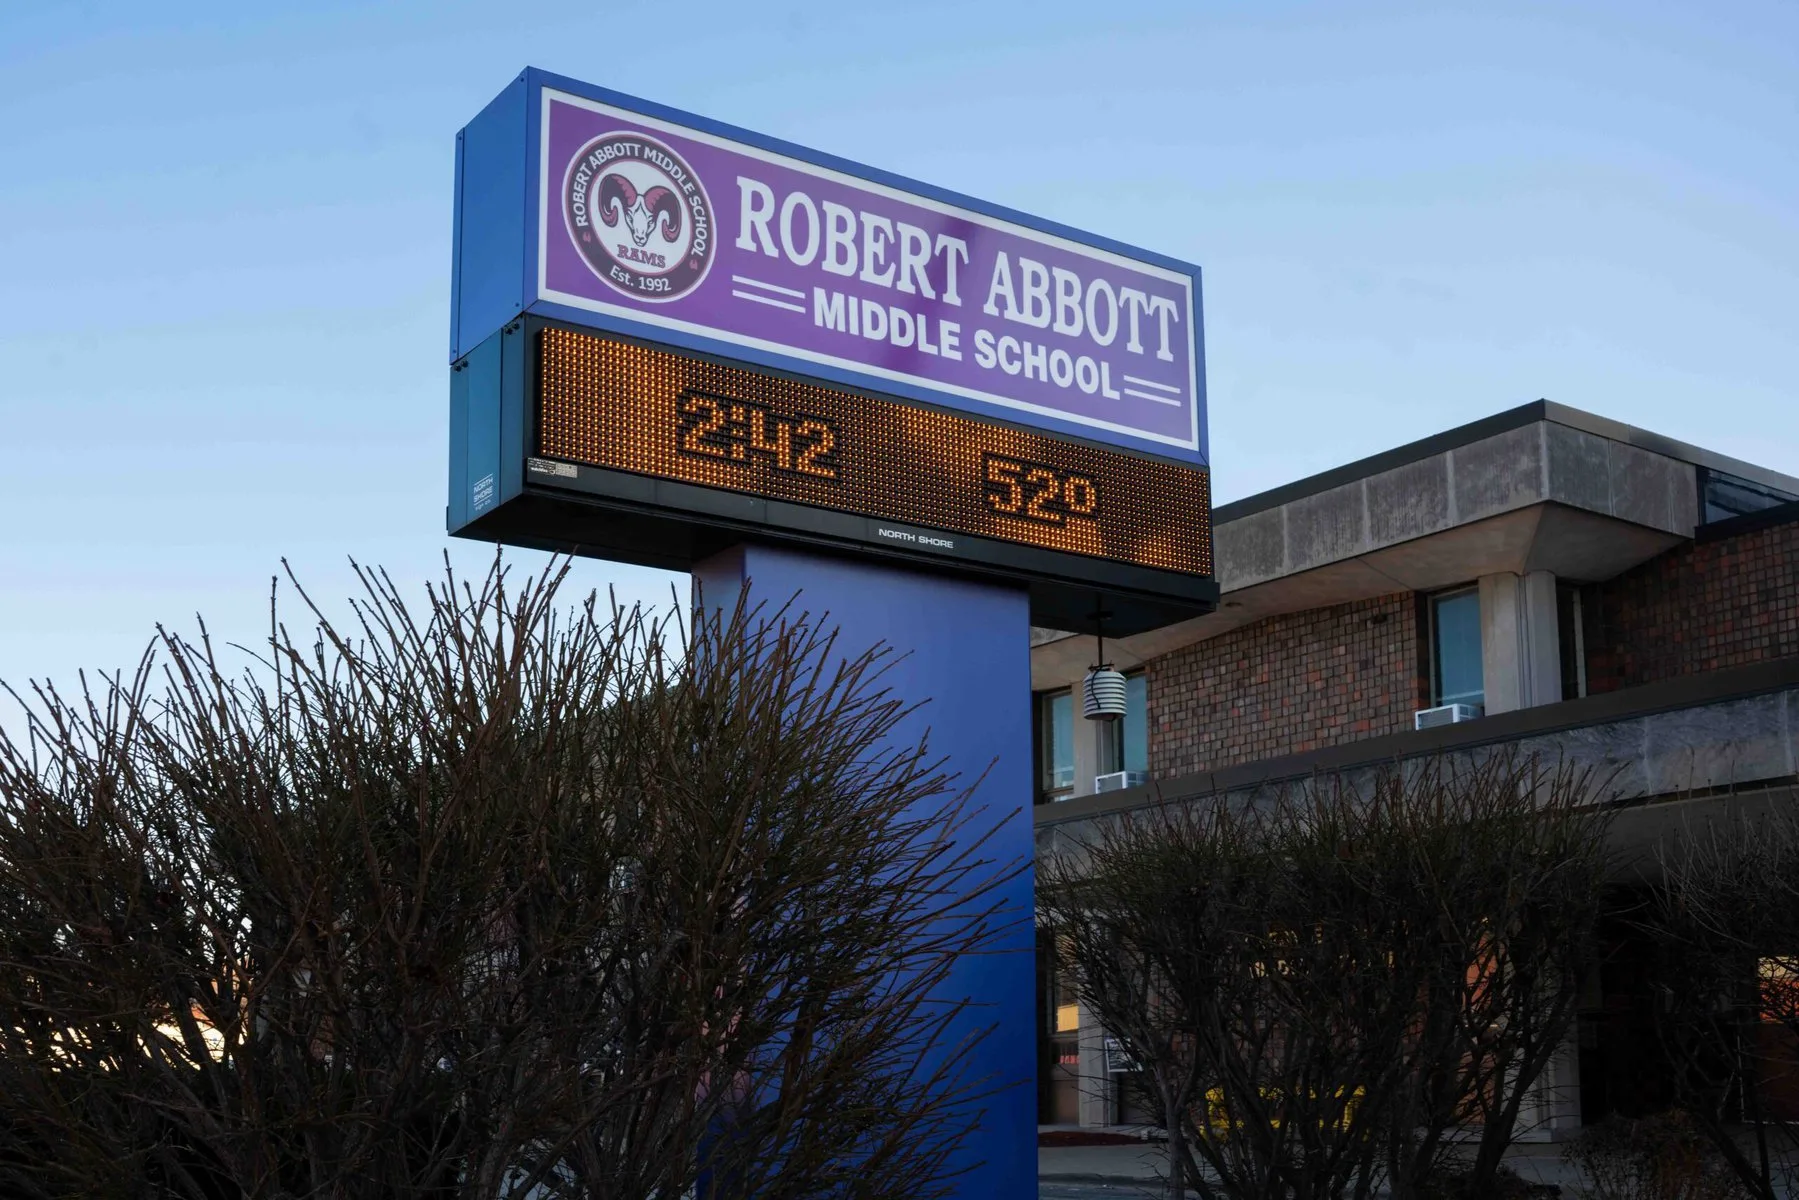 Once a week, girls at Robert Abbott Middle School and other schools in the Waukegan, Illinois, area meet with their peers and a counselor to work through personal problems.